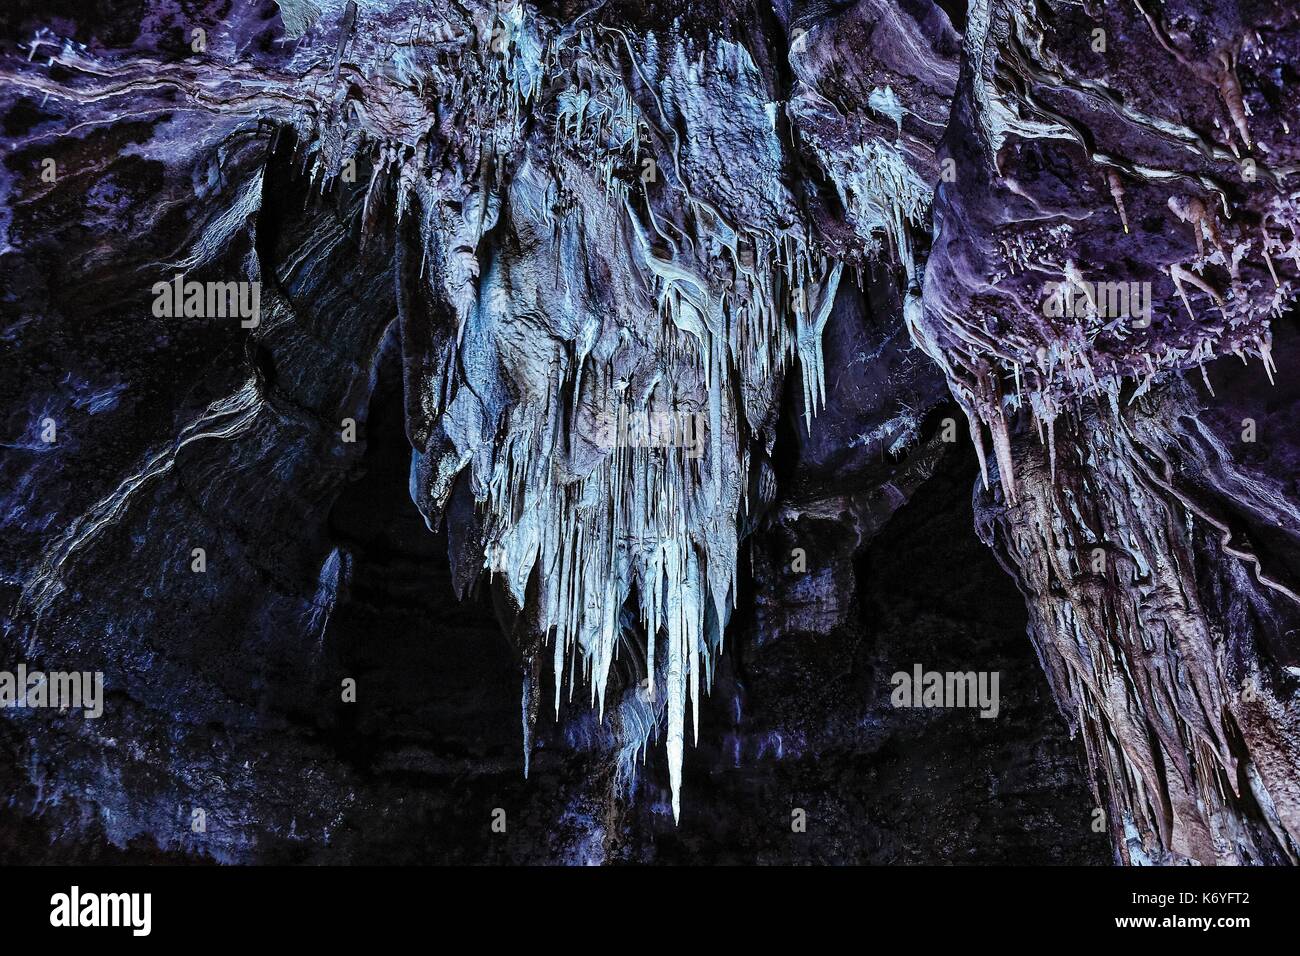 France, Lot, listed at Great Tourist Sites in Midi Pyrenees, Natural regional park Causses du Quercy, Lacave, Lacave cave, illuminated stalactites by ultraviolet light Stock Photo